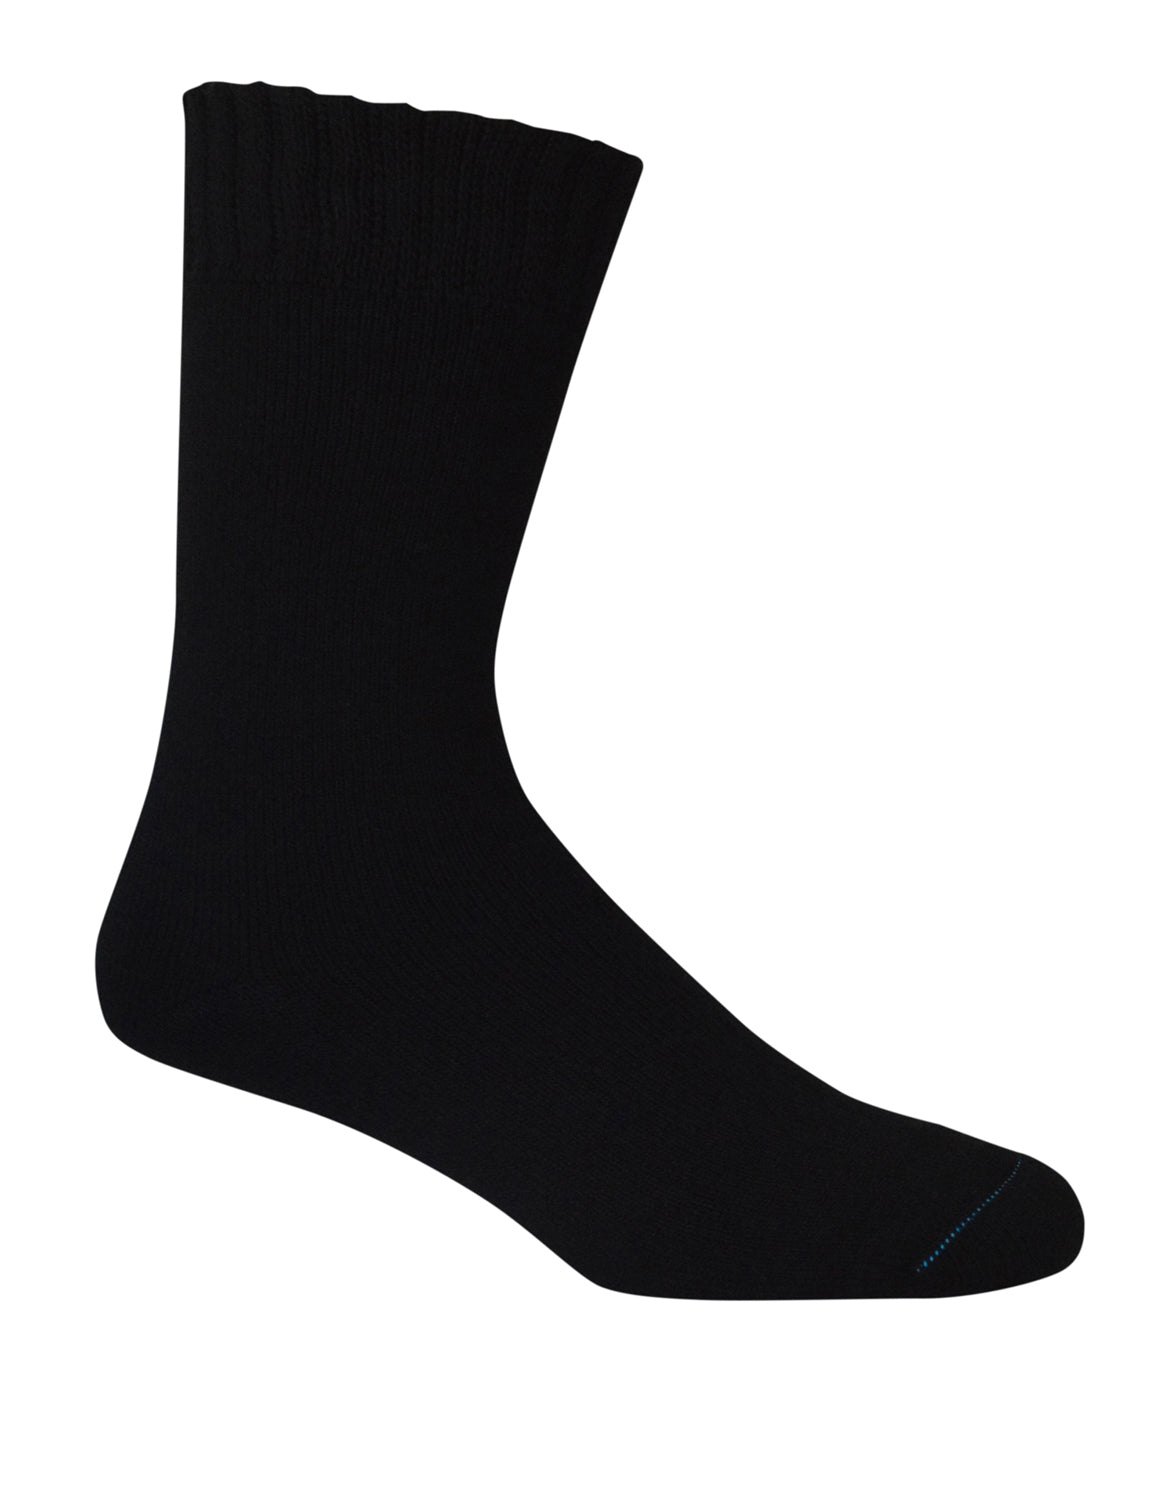 Extra Thick Bamboo Socks Miscellaneous by Bamboo Textiles | The Bloke Shop